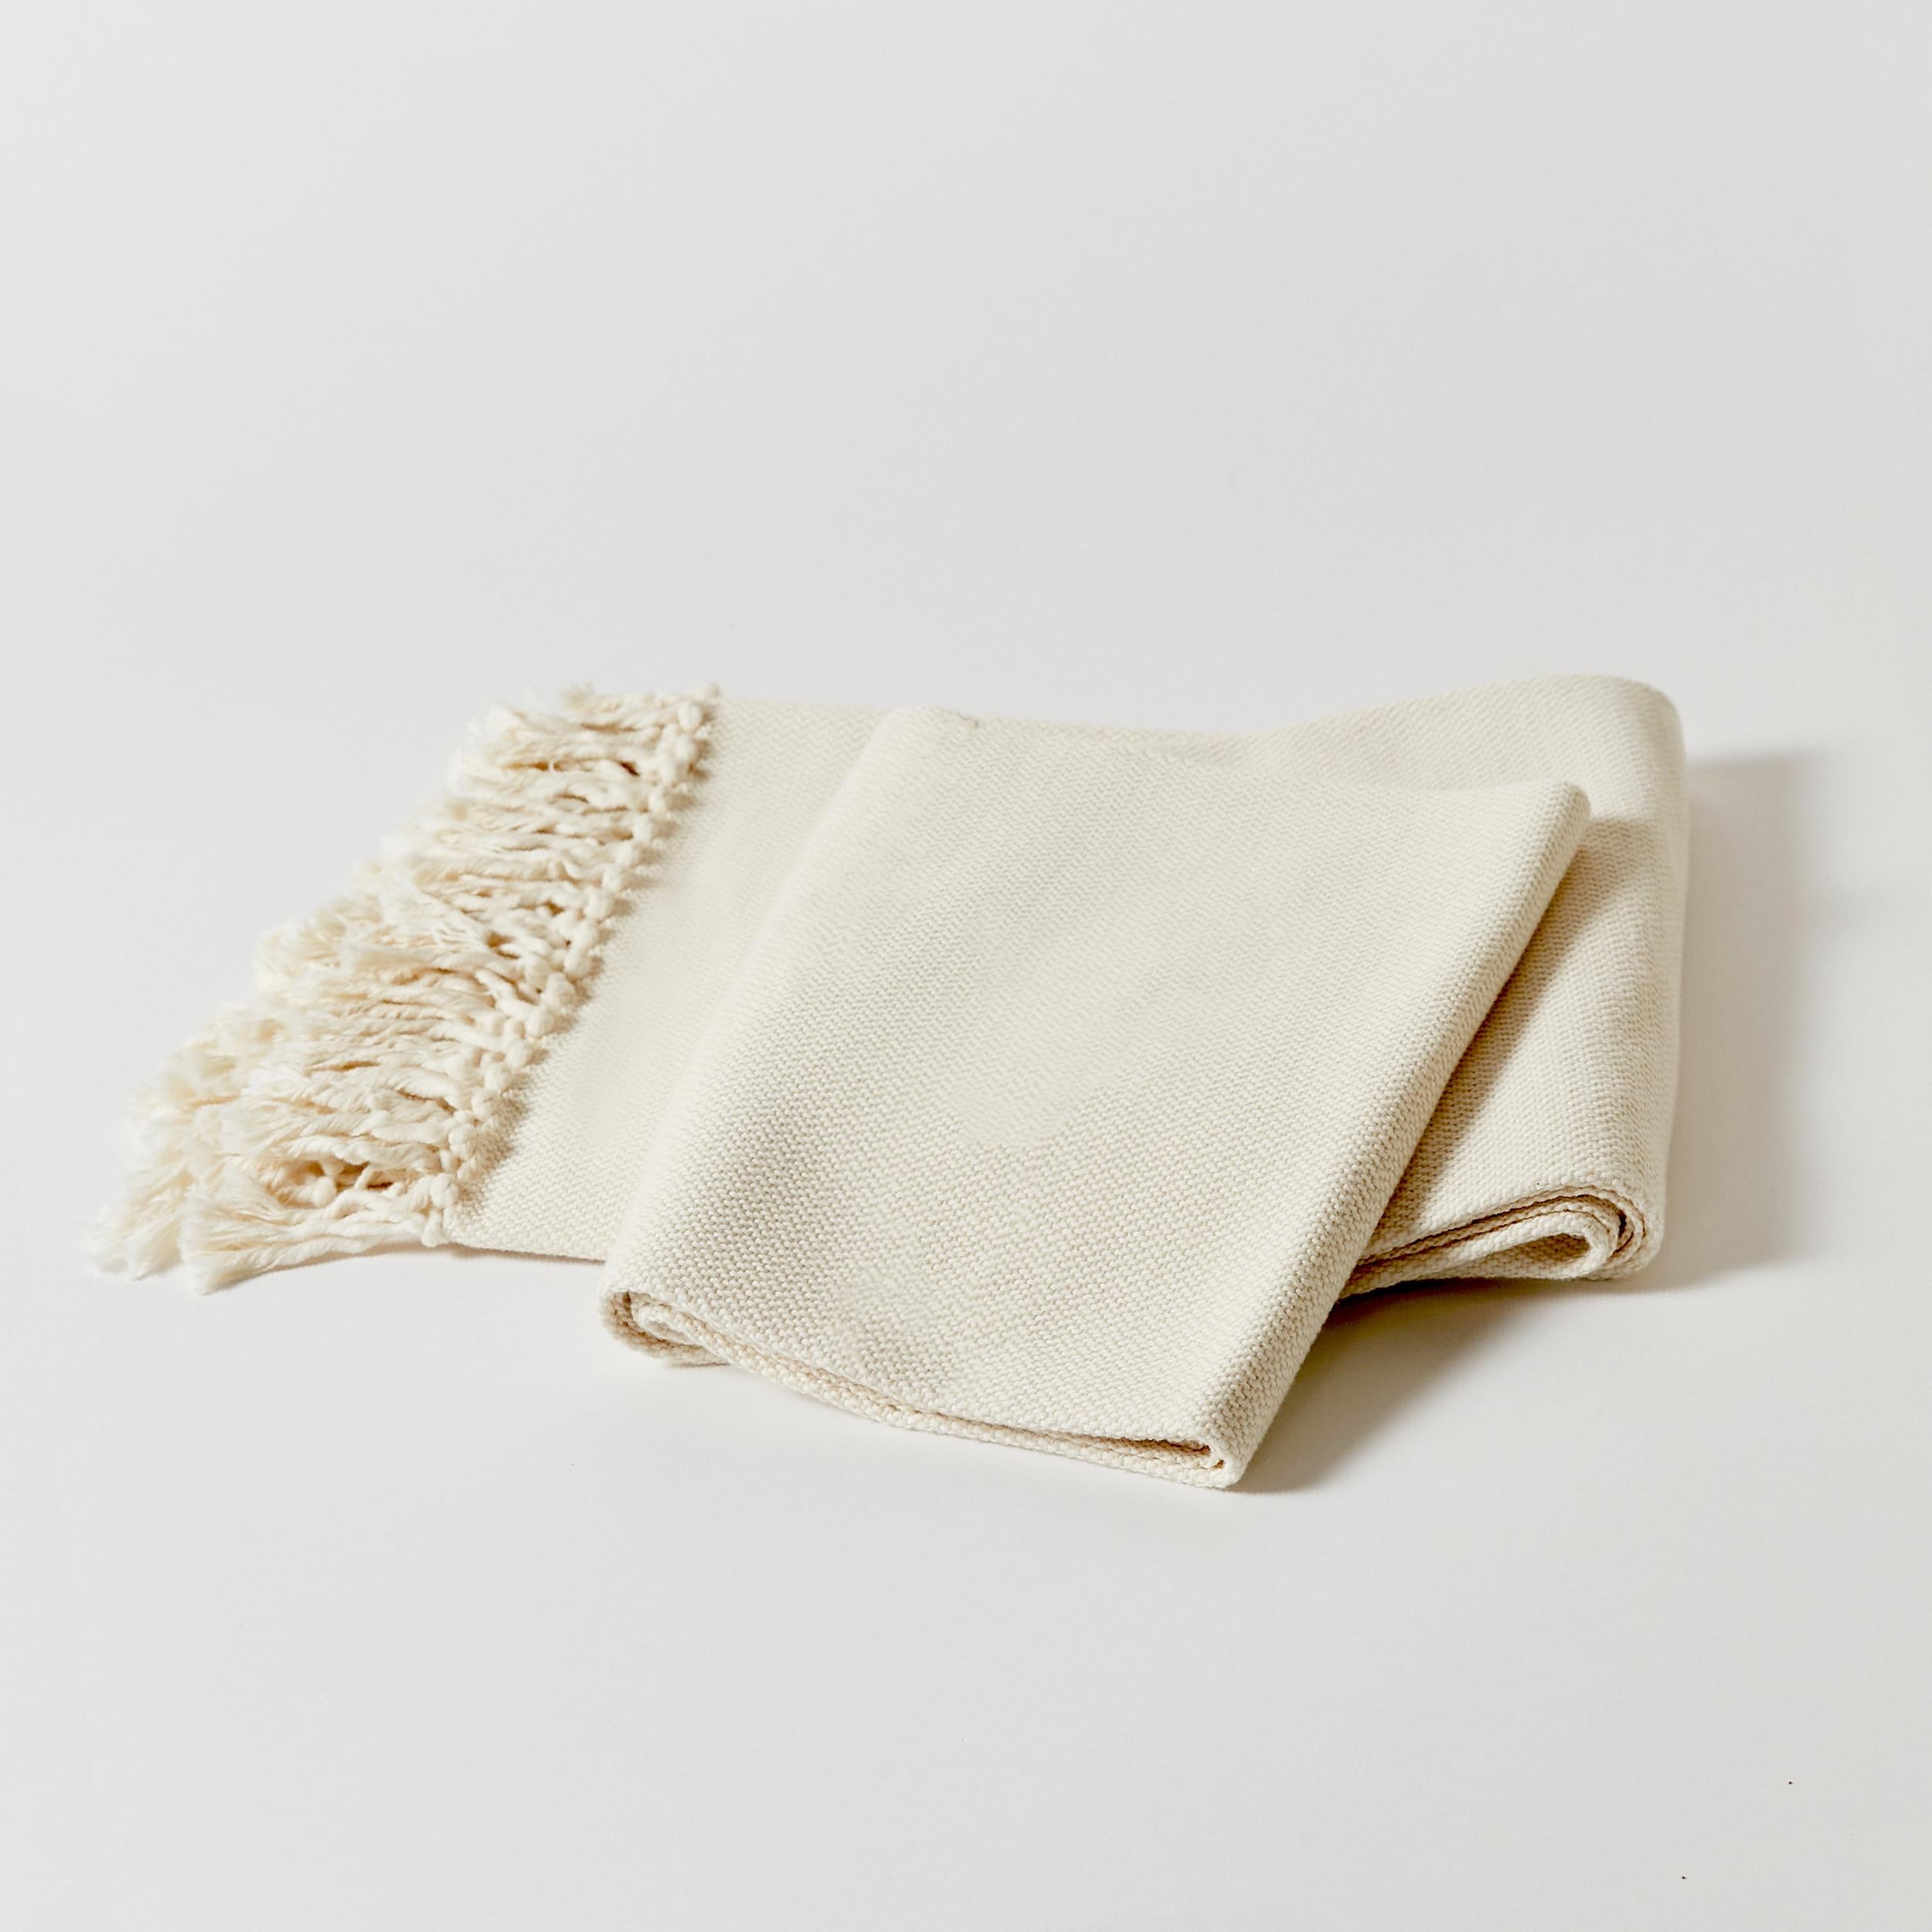 Hand-Woven throw with natural fringe. Made in Argentina with pure handspun cotton.